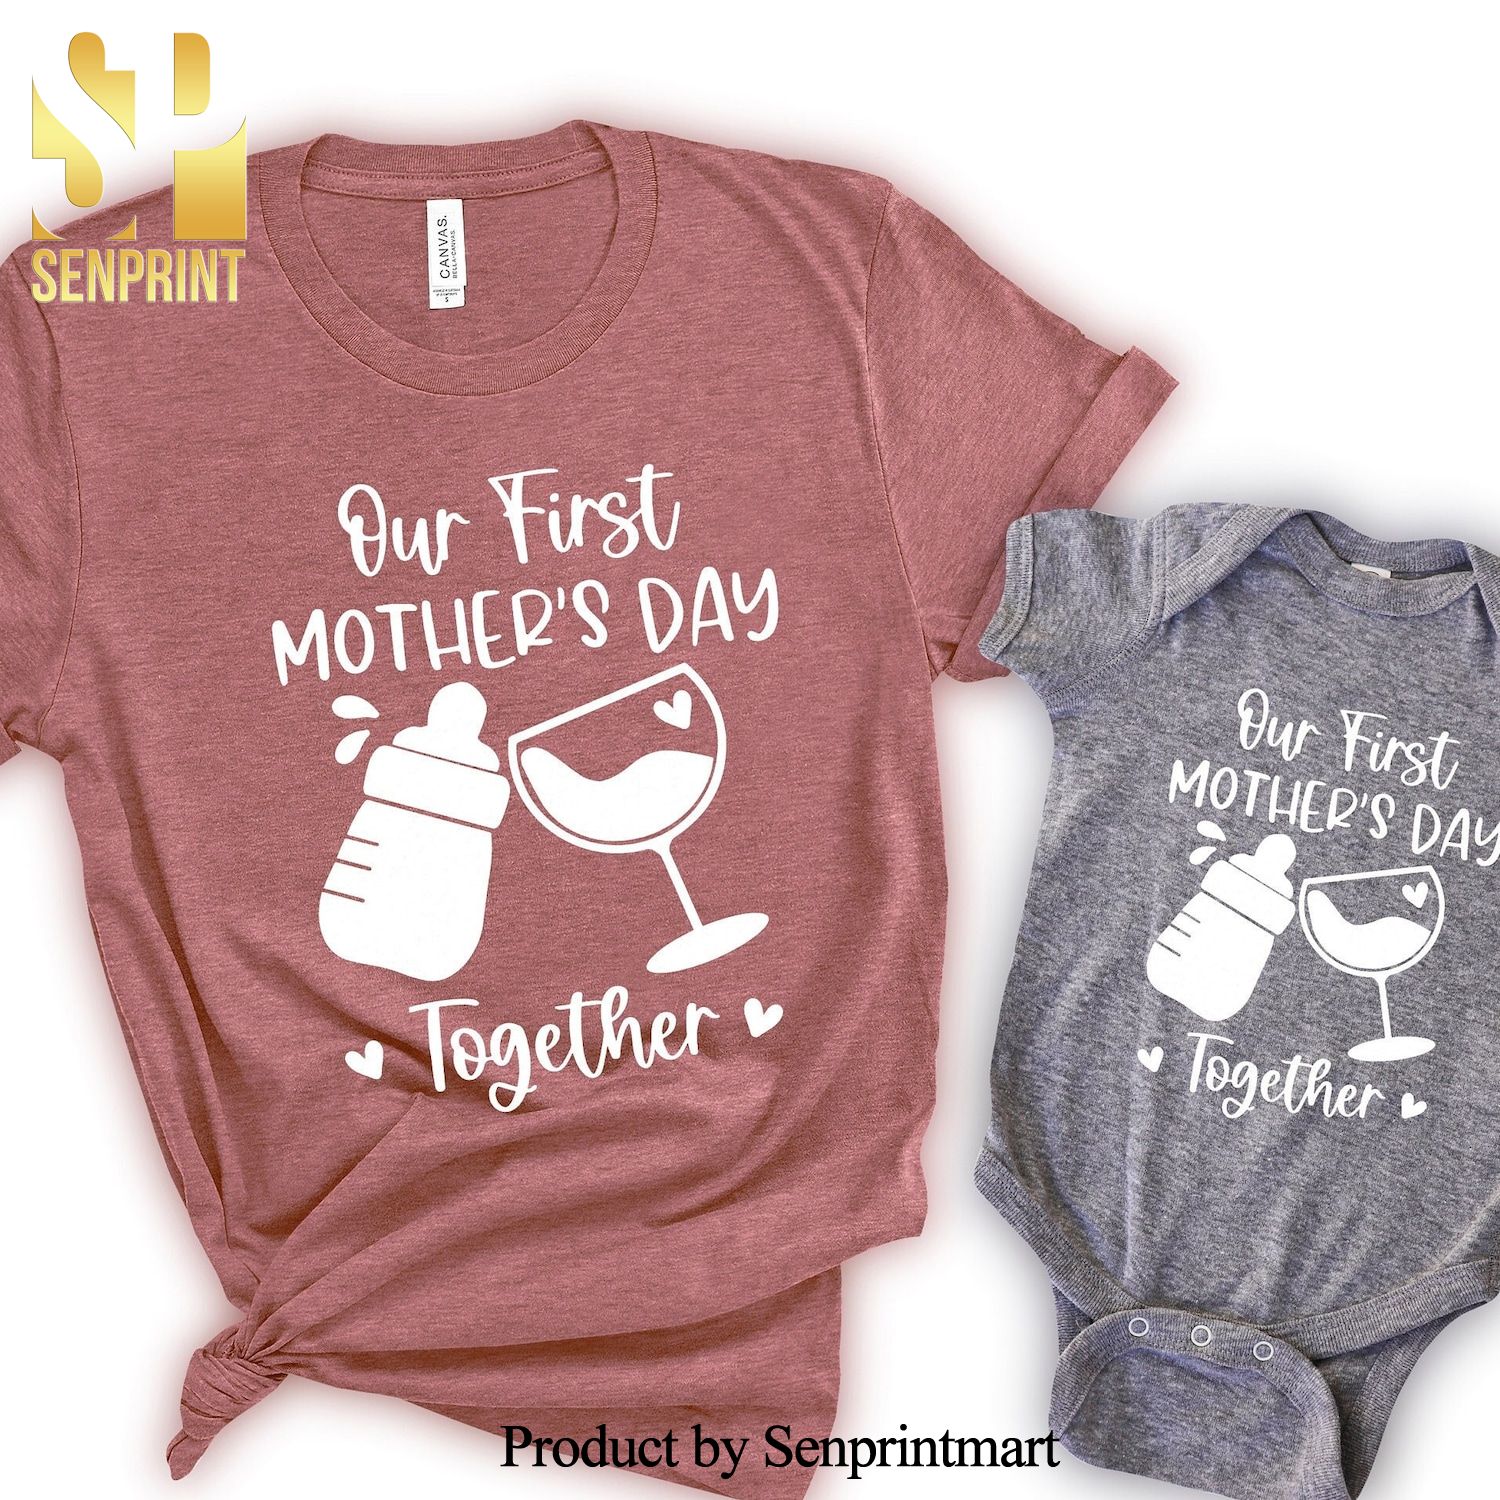 Our First Mother’s Day Gift Shirt